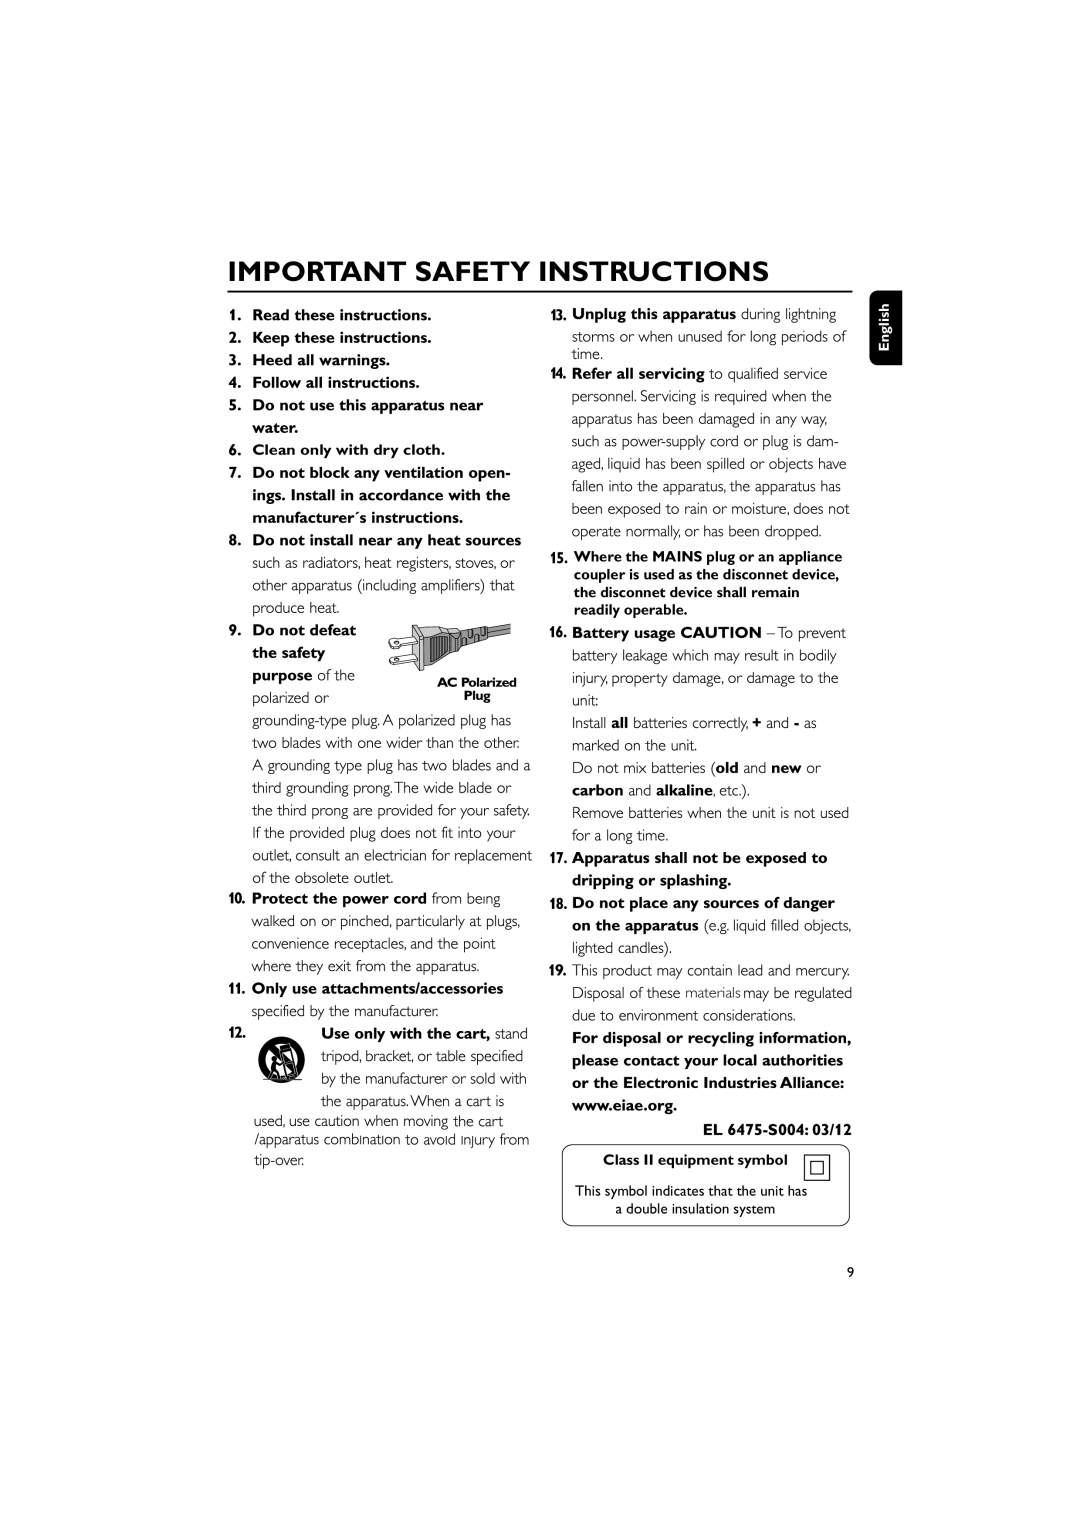 Philips DC156/37 quick start Important Safety Instructions, Clean only with dry cloth, English, Class II equipment symbol 